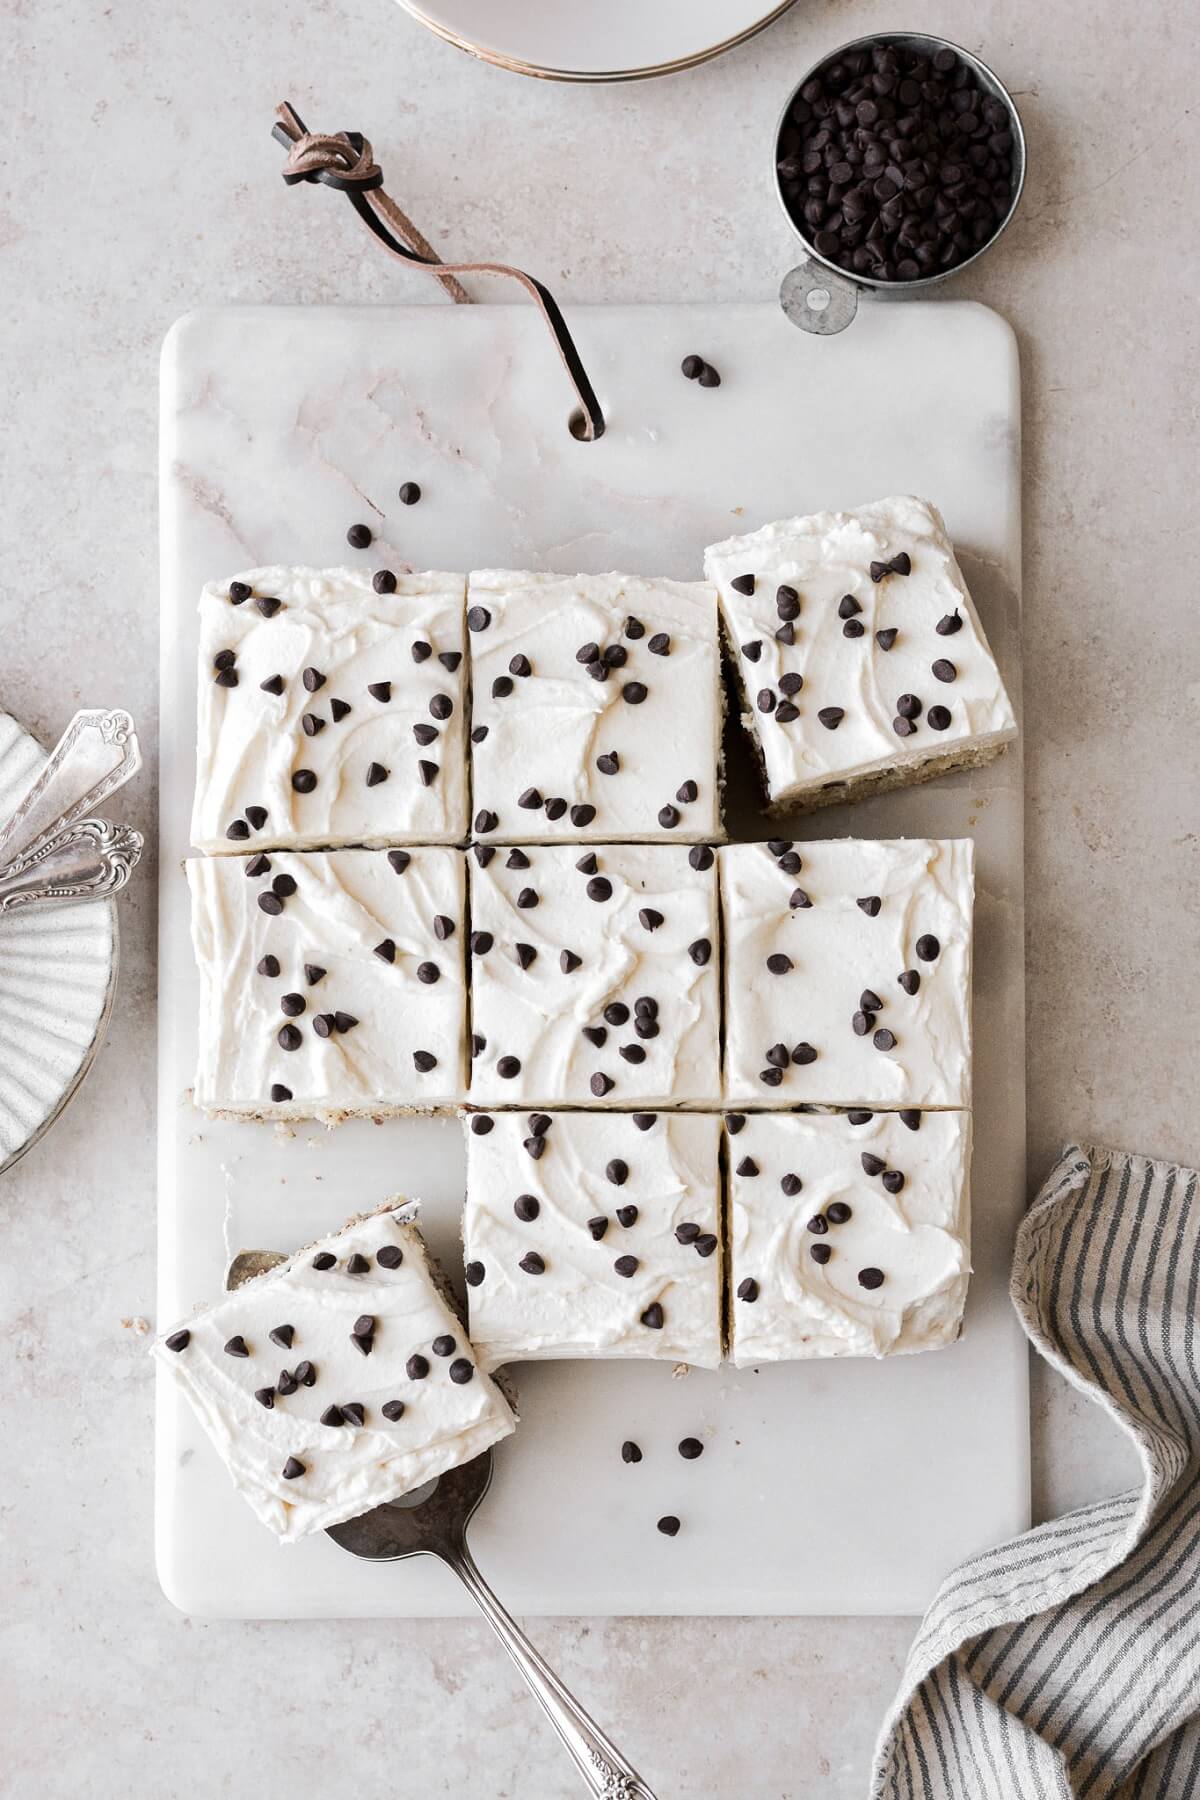 Squares of chocolate chip cake on a marble board.